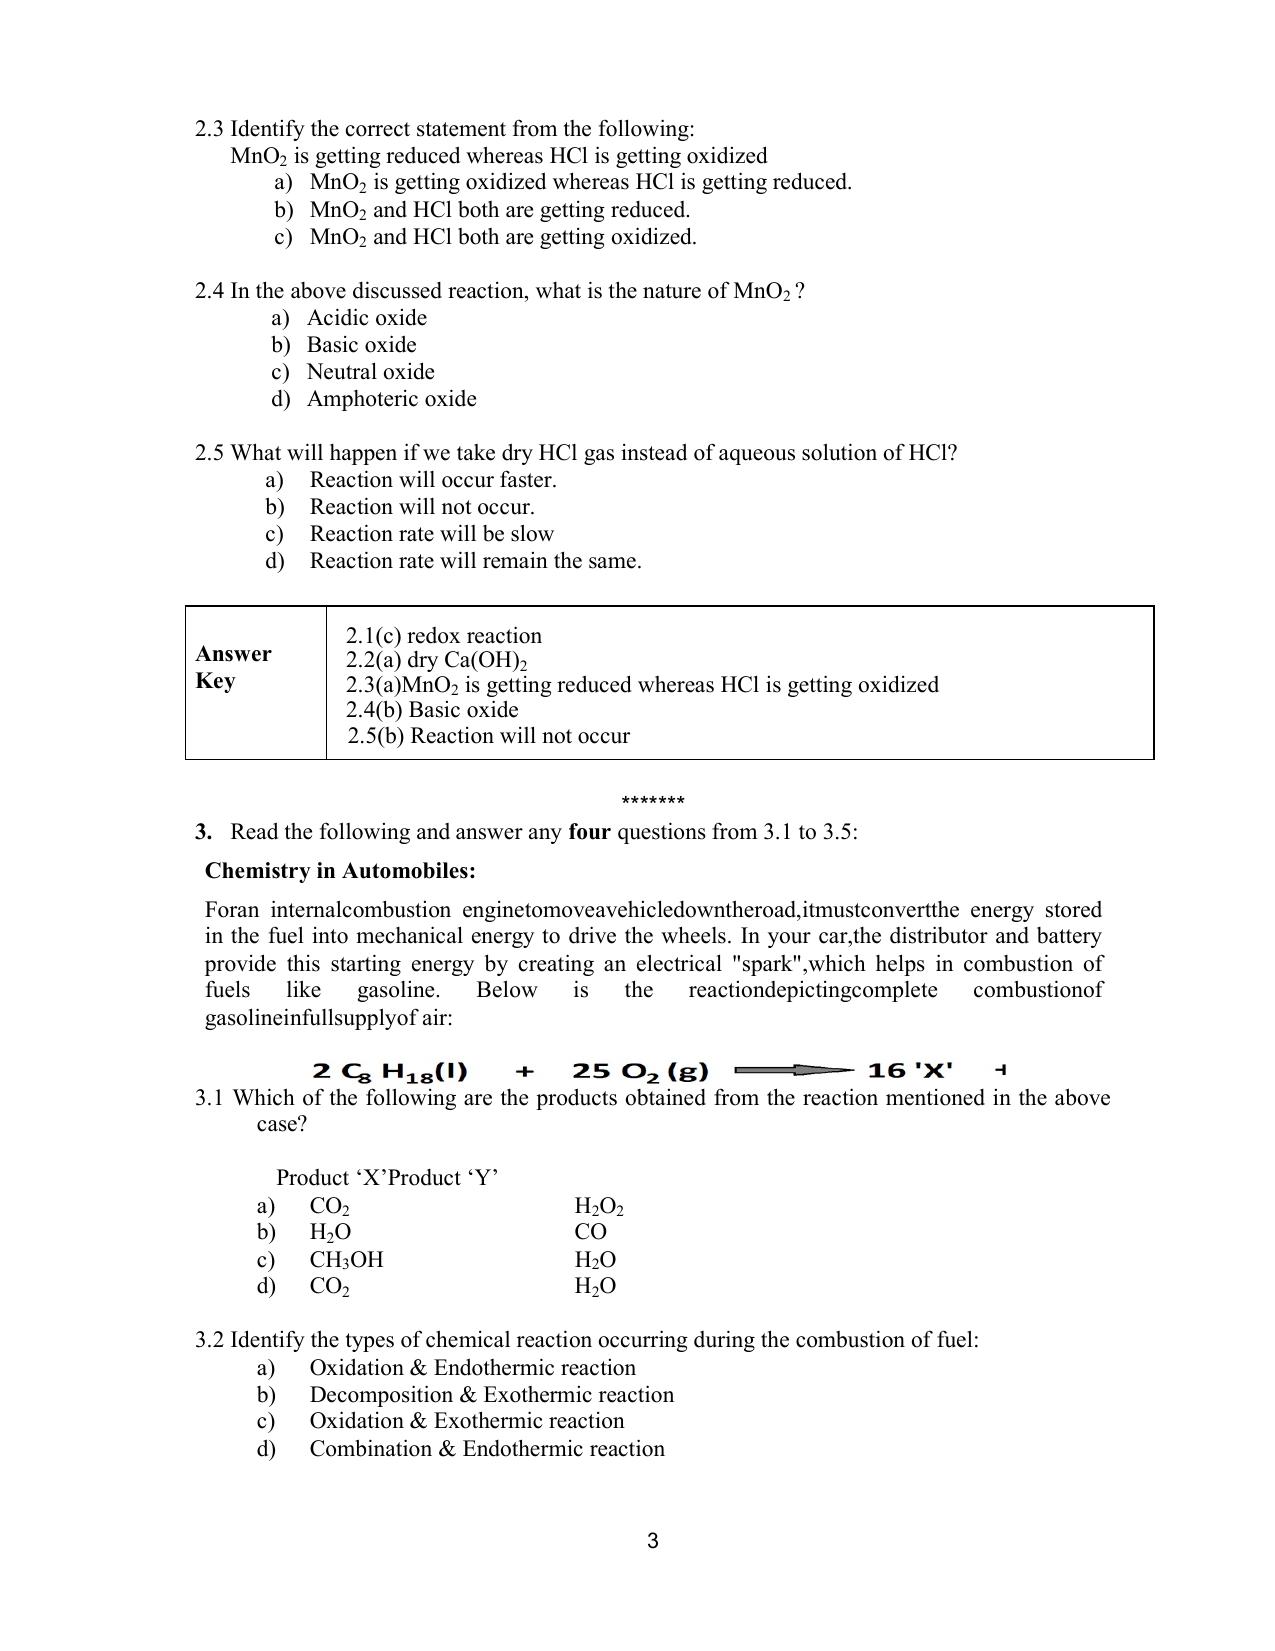 CBSE Class 10 Science Question Bank - Page 3